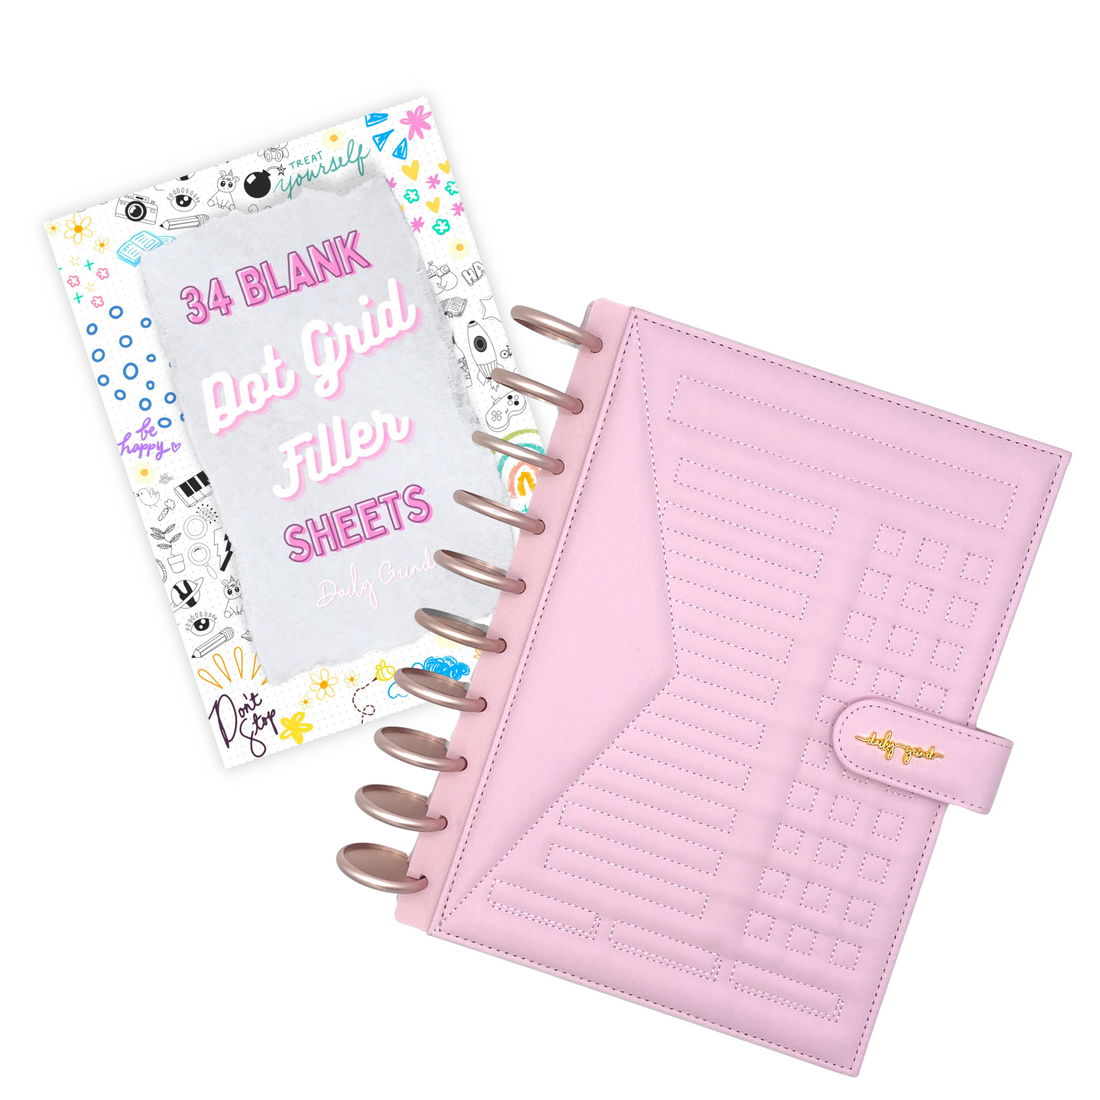 &quot;34 Blank Dot Grid Filler Sheets&quot; cover page and pink planner